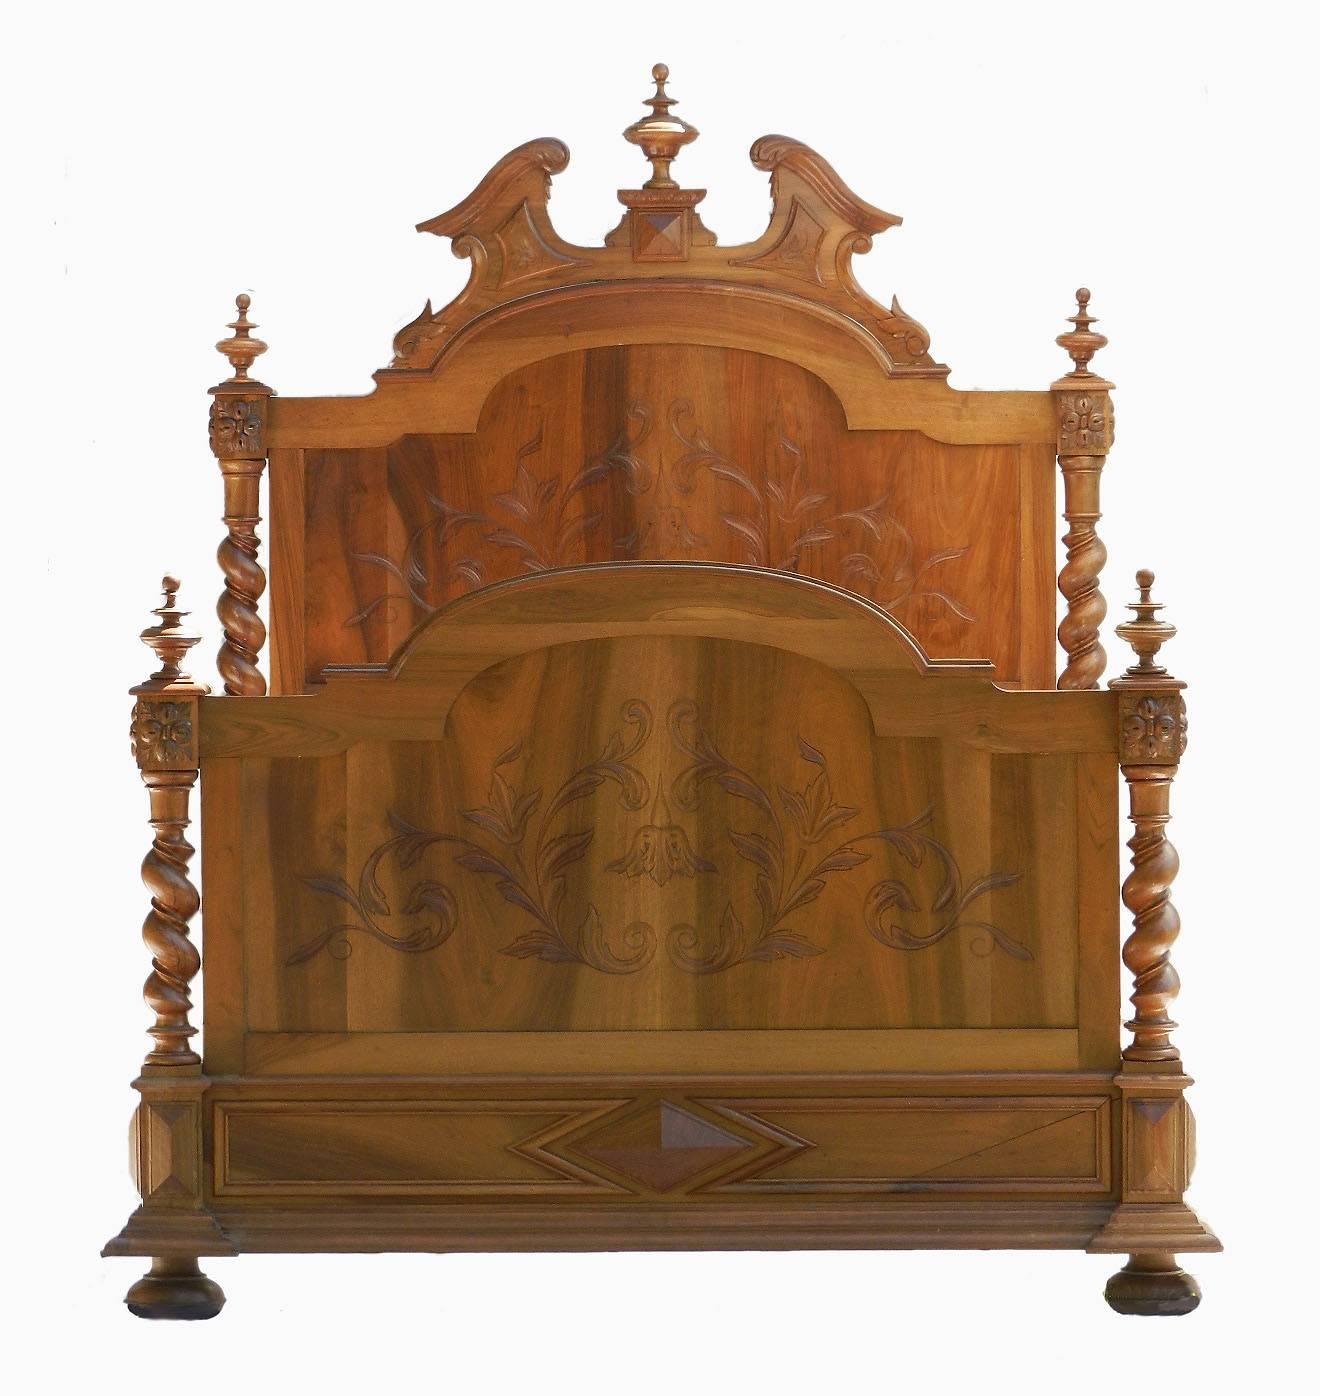 Stunning French double bed 19th century, Louis XIII revival, circa 1850
Solid carved walnut
This will take a standard US Full Double or a UK Double Mattress, for more info, please ask, we're always happy to help
Free shipping to England
UK